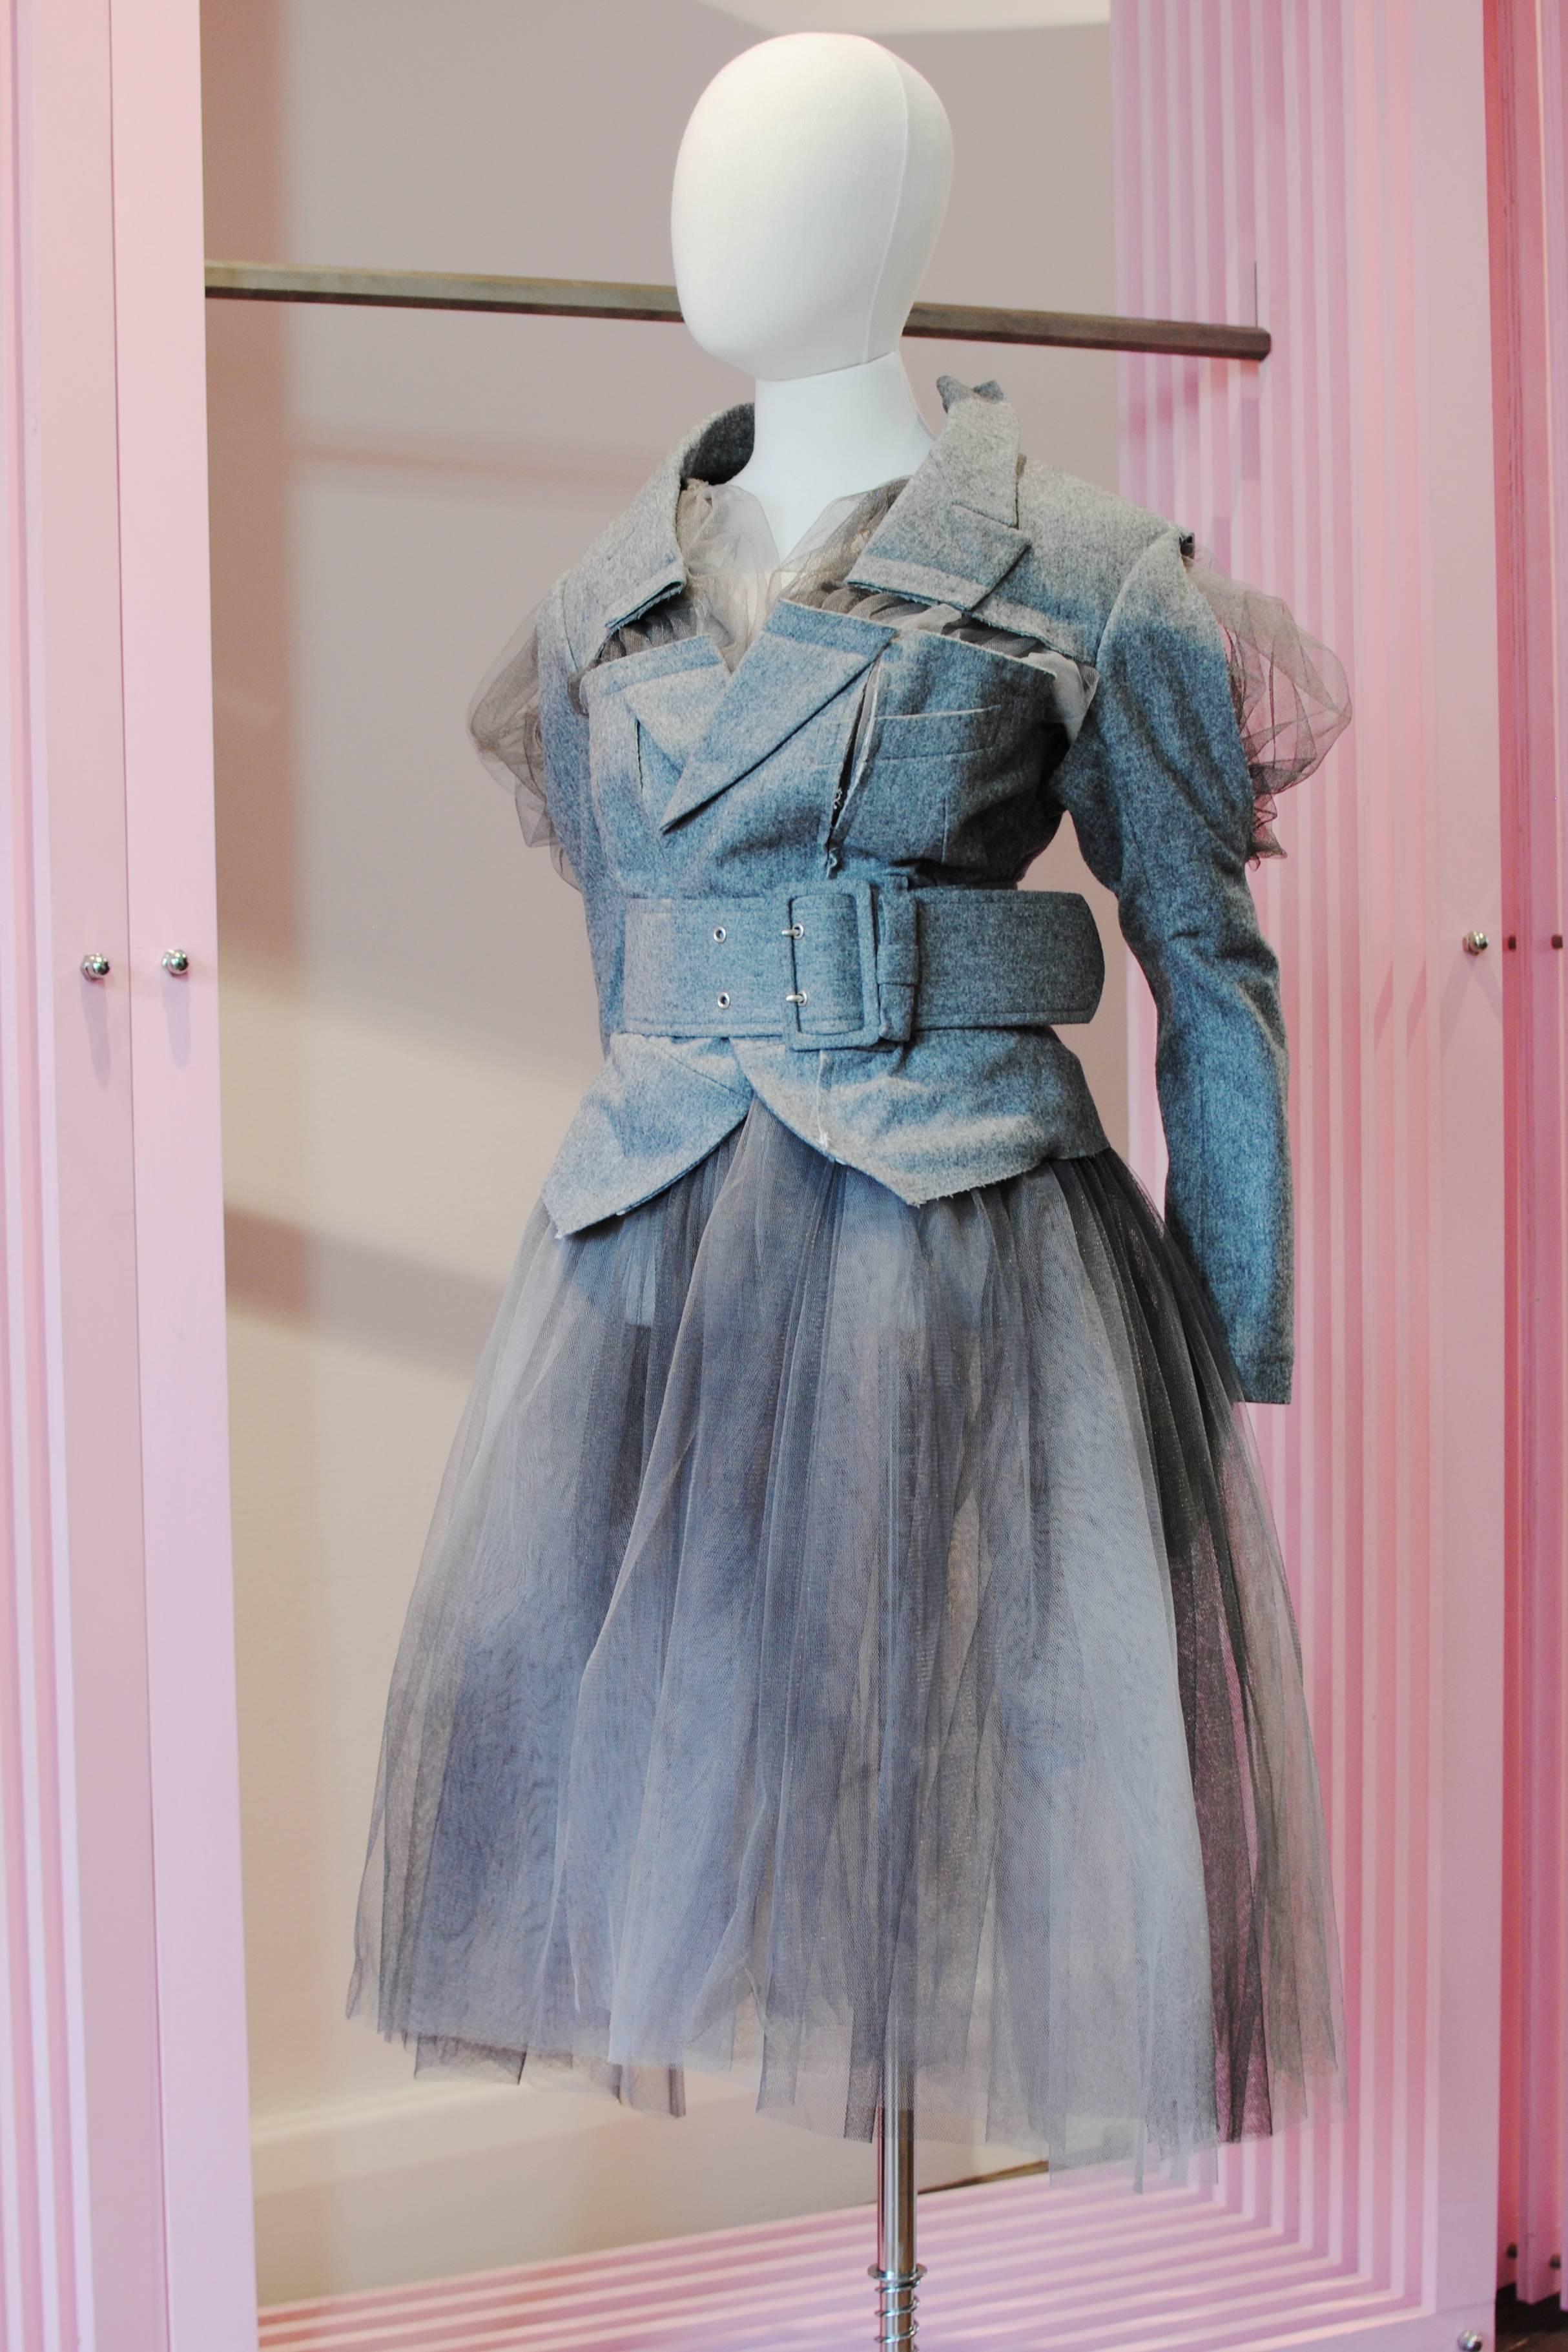 COMME des GARÇONS deconstructed grey tulle jacket dress from the 2007 Spring/Summer collection. It features a grey wool jacket with belt which is cut away in sections to reveal the layers of tulle underneath.

Size — Small
Shoulder — 45